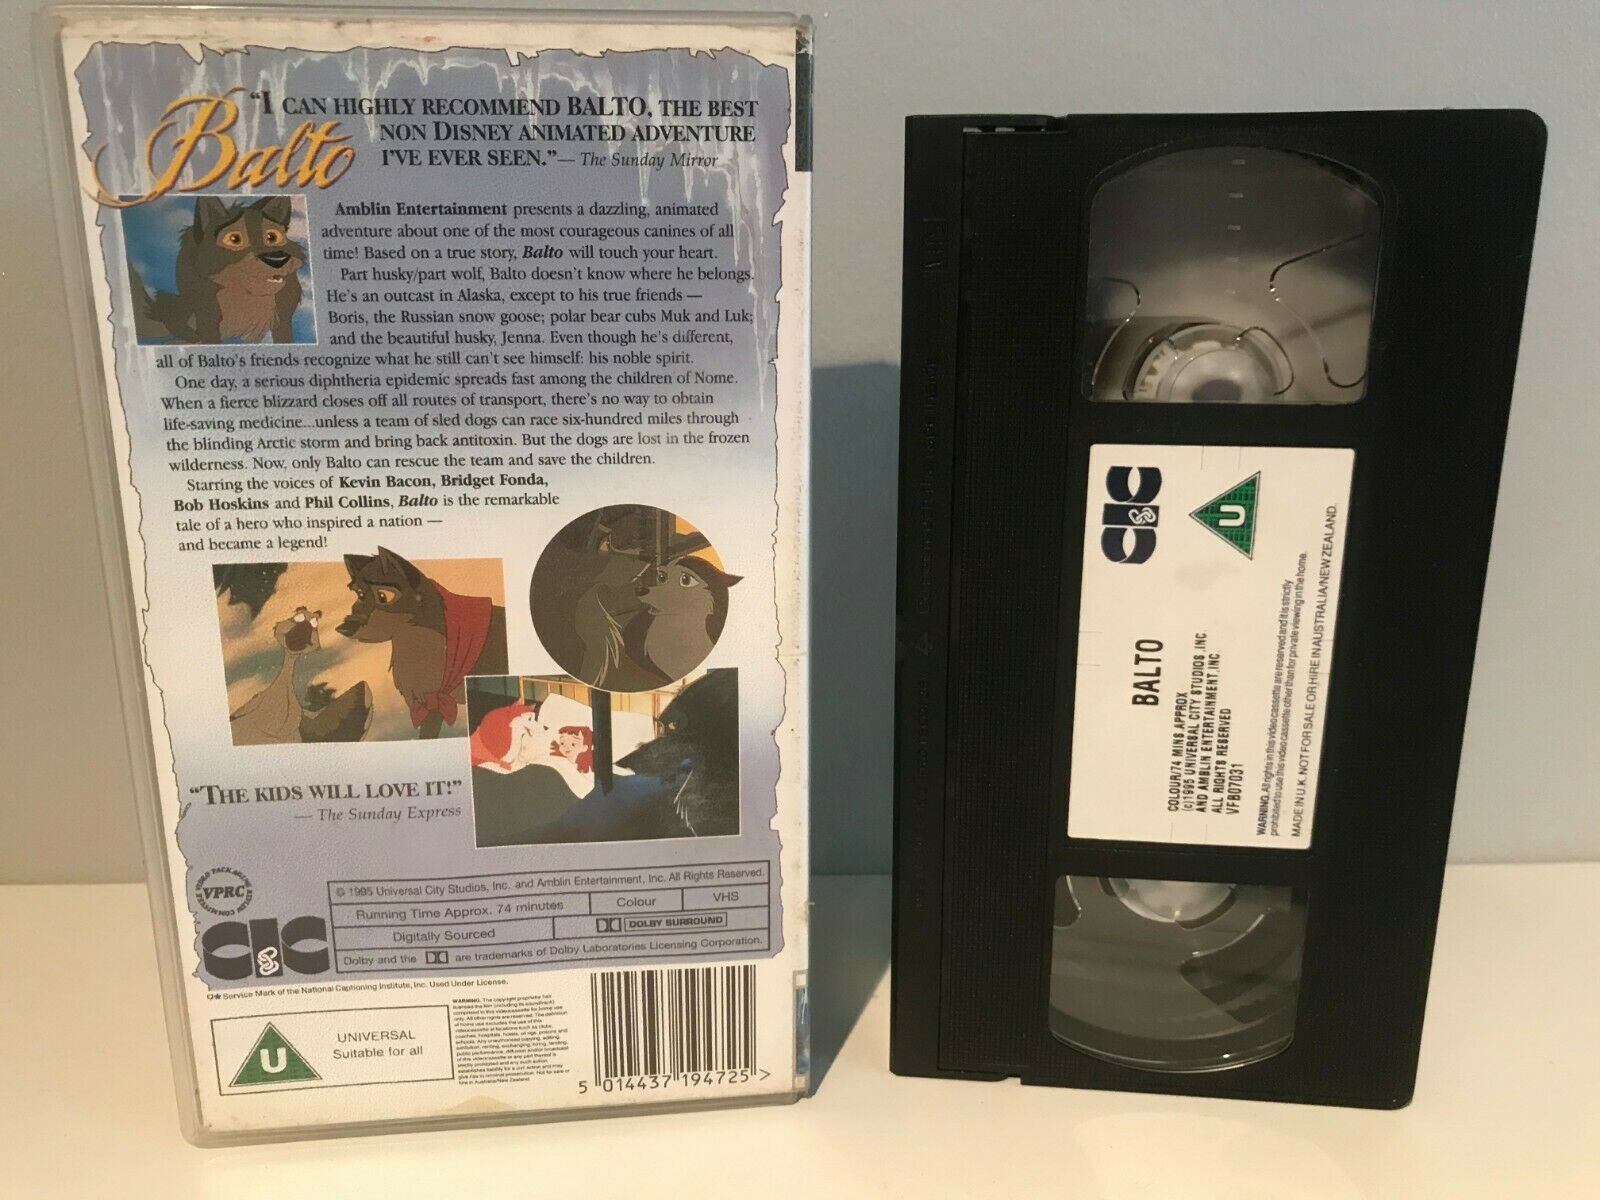 This is the most well made VHS animation yet